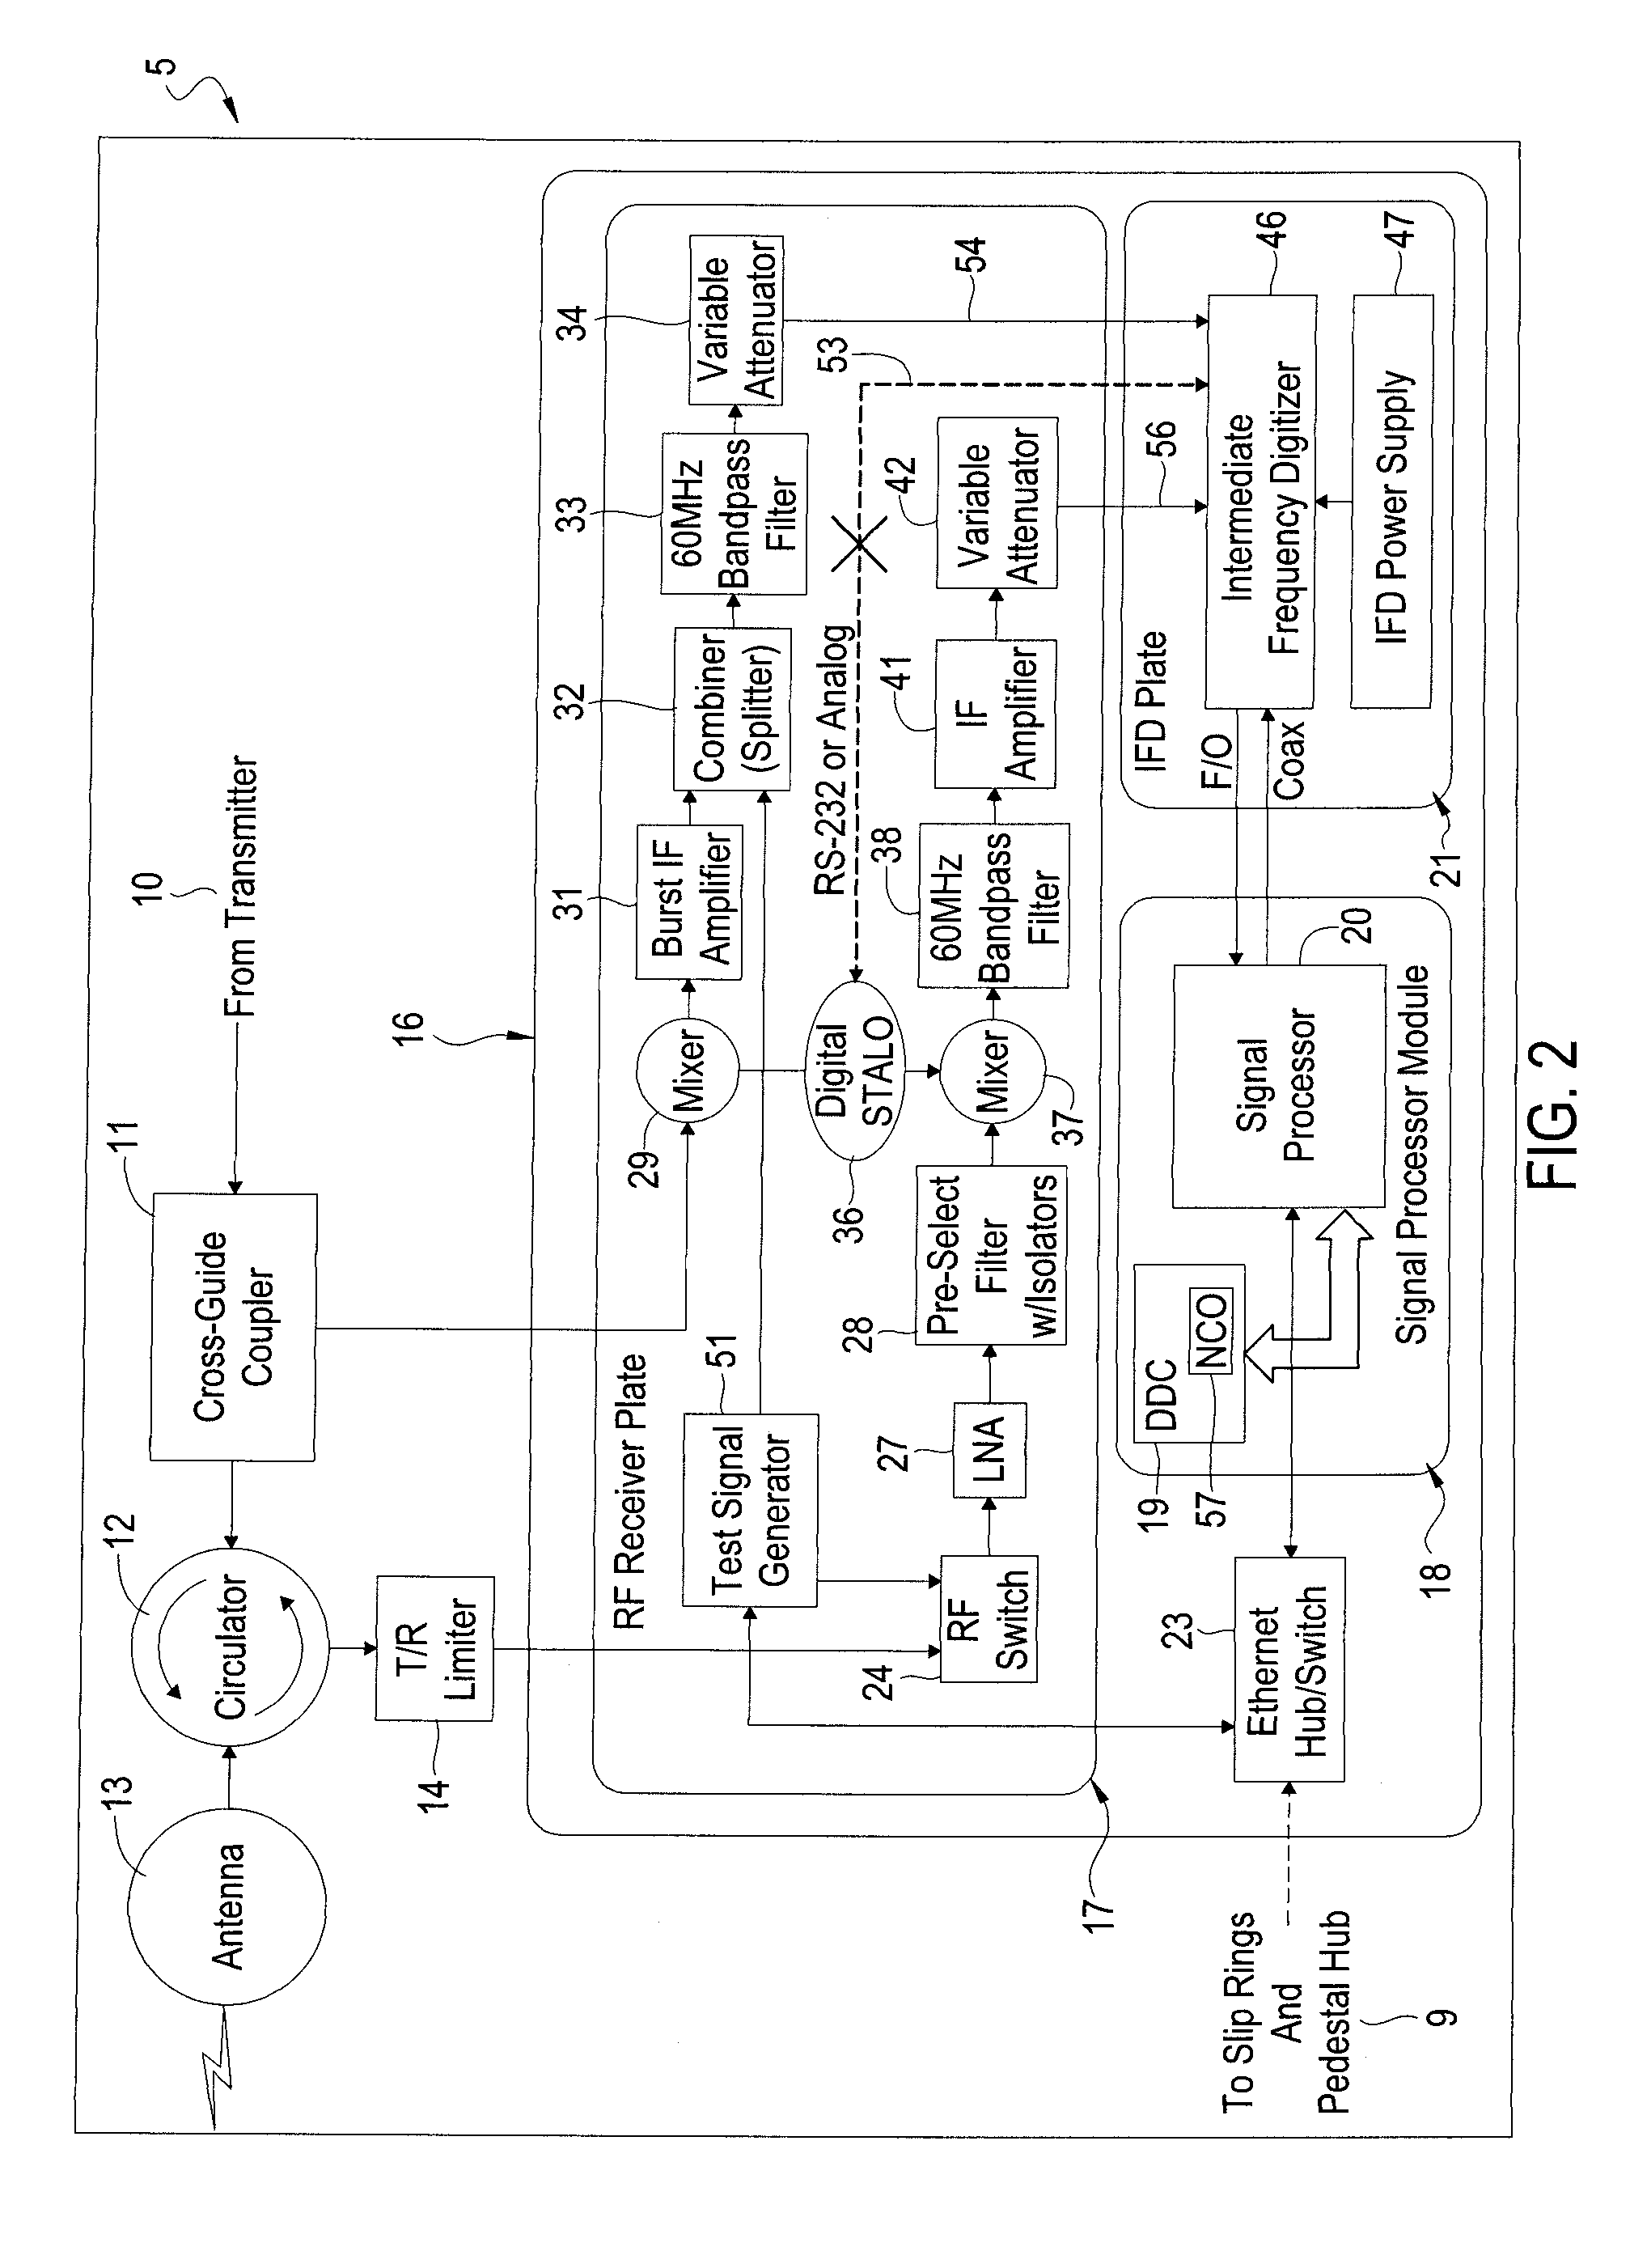 System and method for adaptation of a radar receiver in response to frequency drift in a transmission source